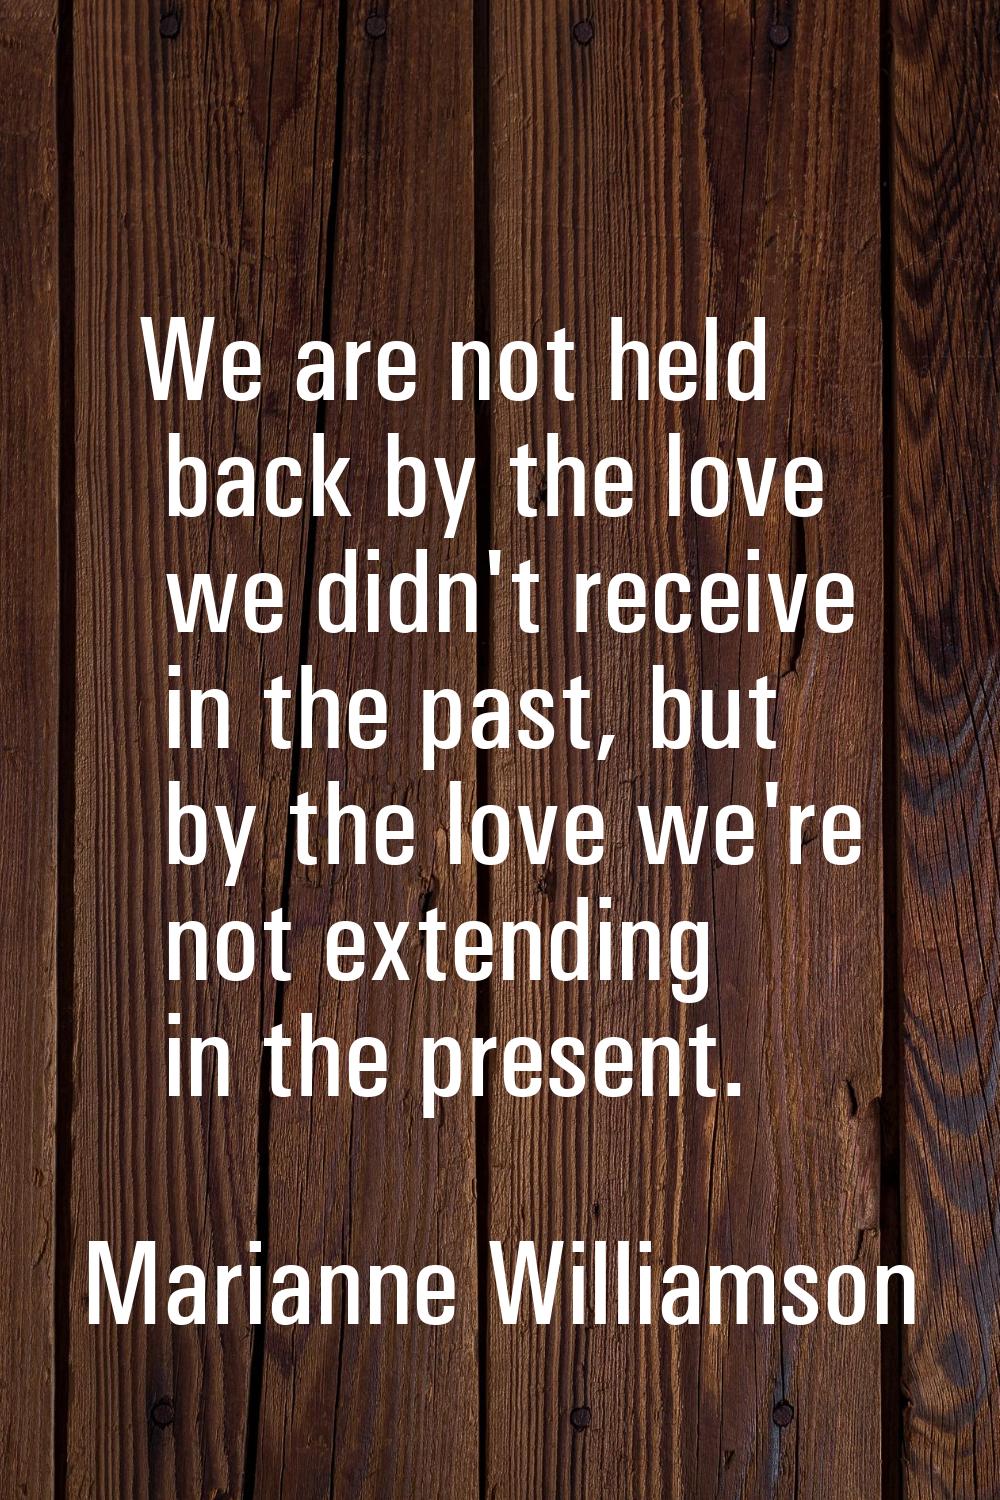 We are not held back by the love we didn't receive in the past, but by the love we're not extending